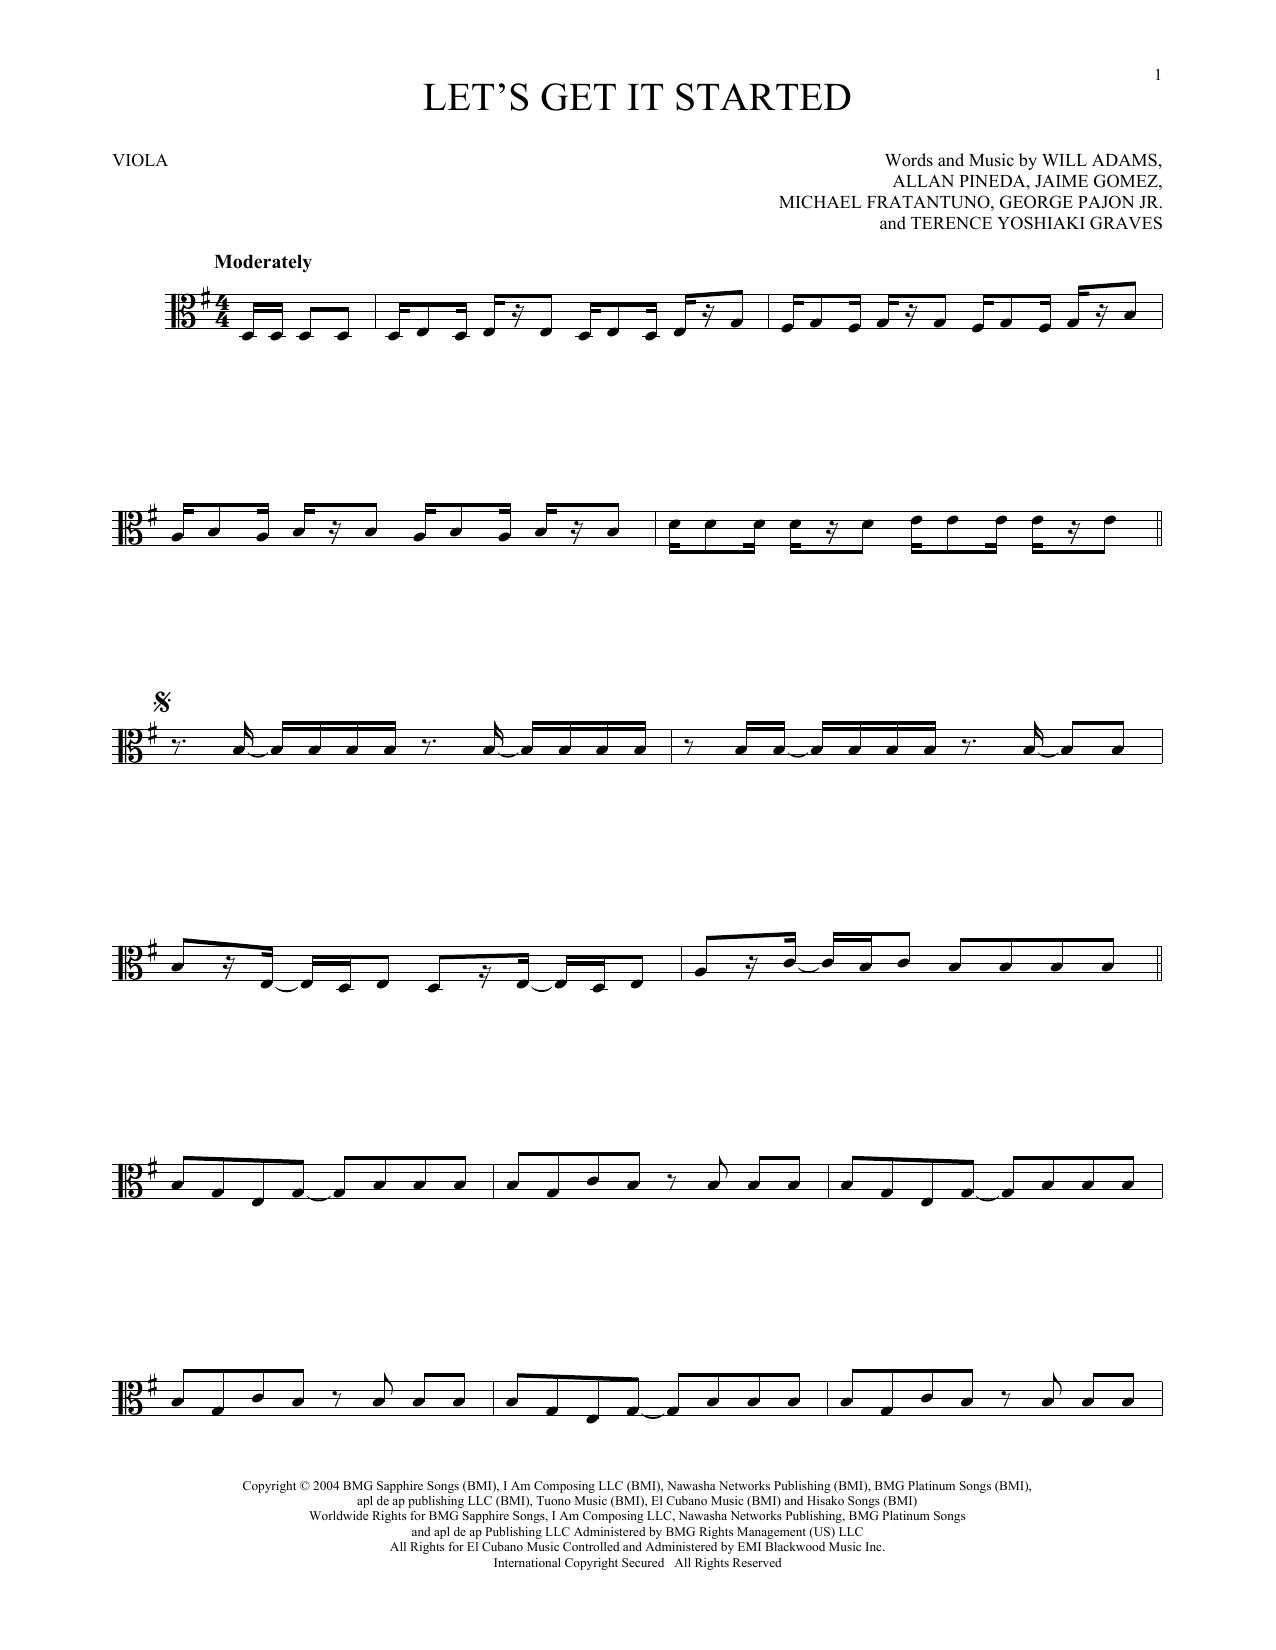 Black Eyed Peas Let's Get It Started sheet music notes and chords. Download Printable PDF.